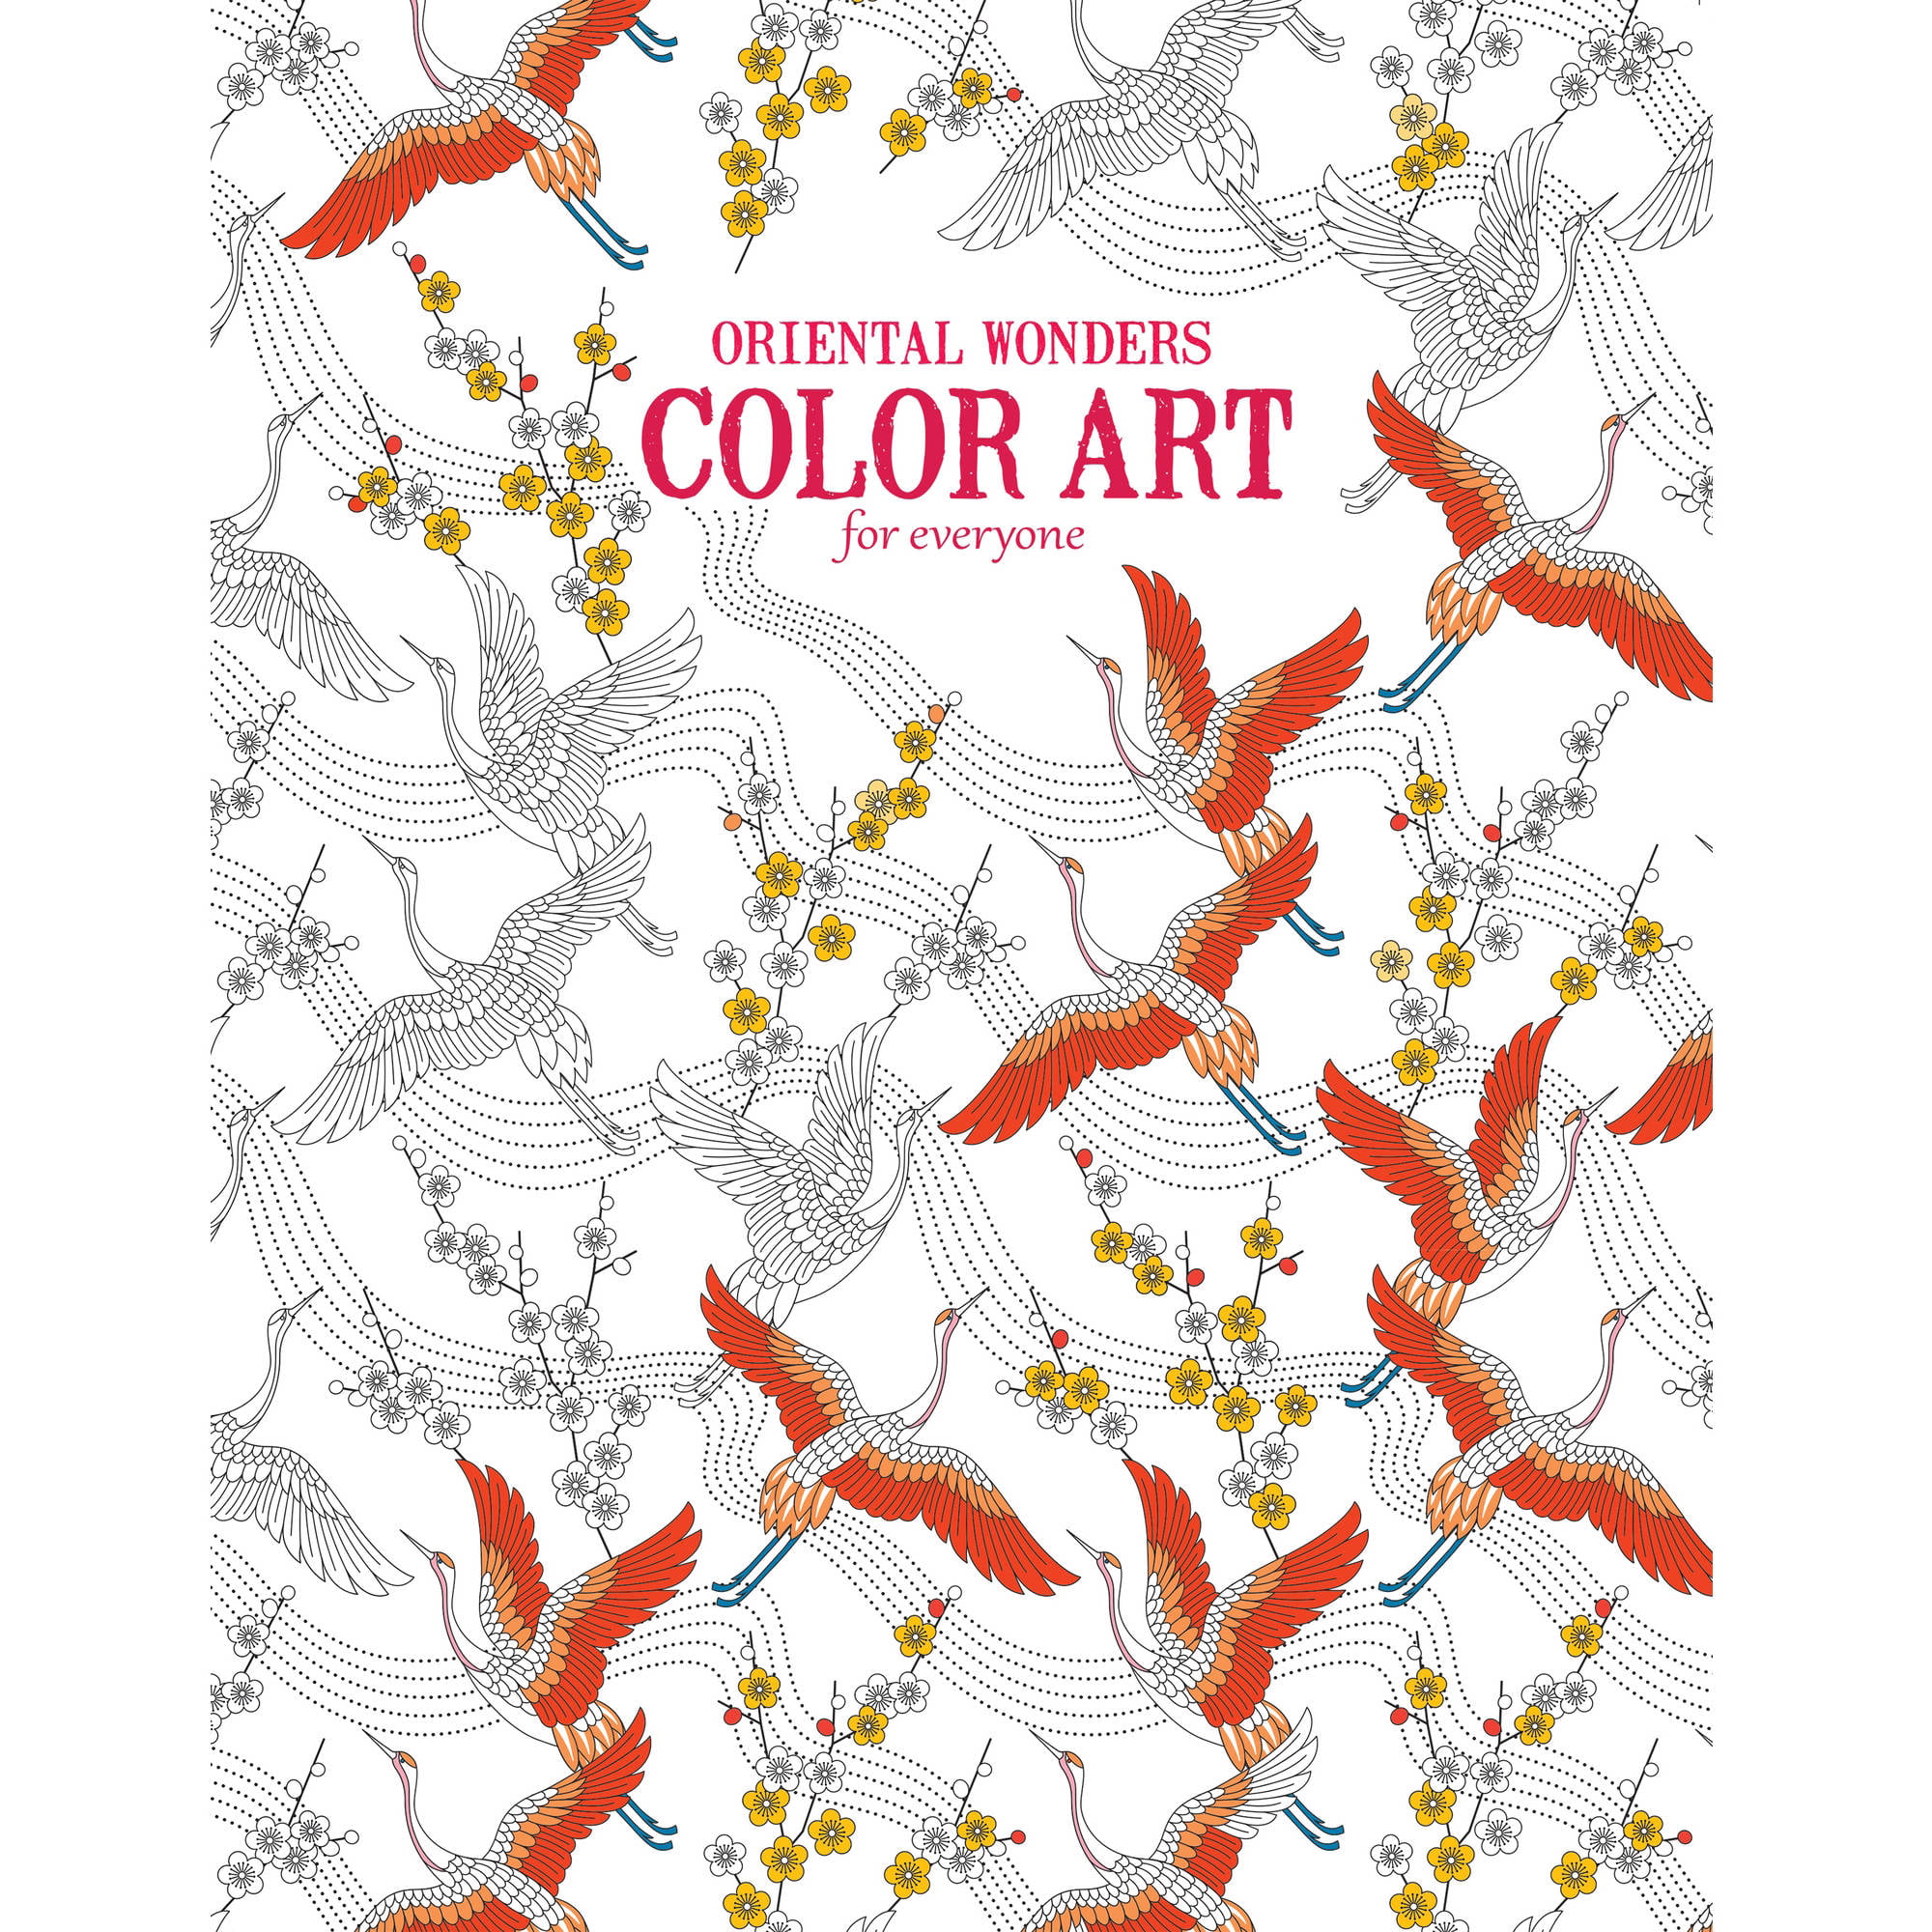 IV. Tips for Finding the Perfect Coloring Book for Your Skill Level